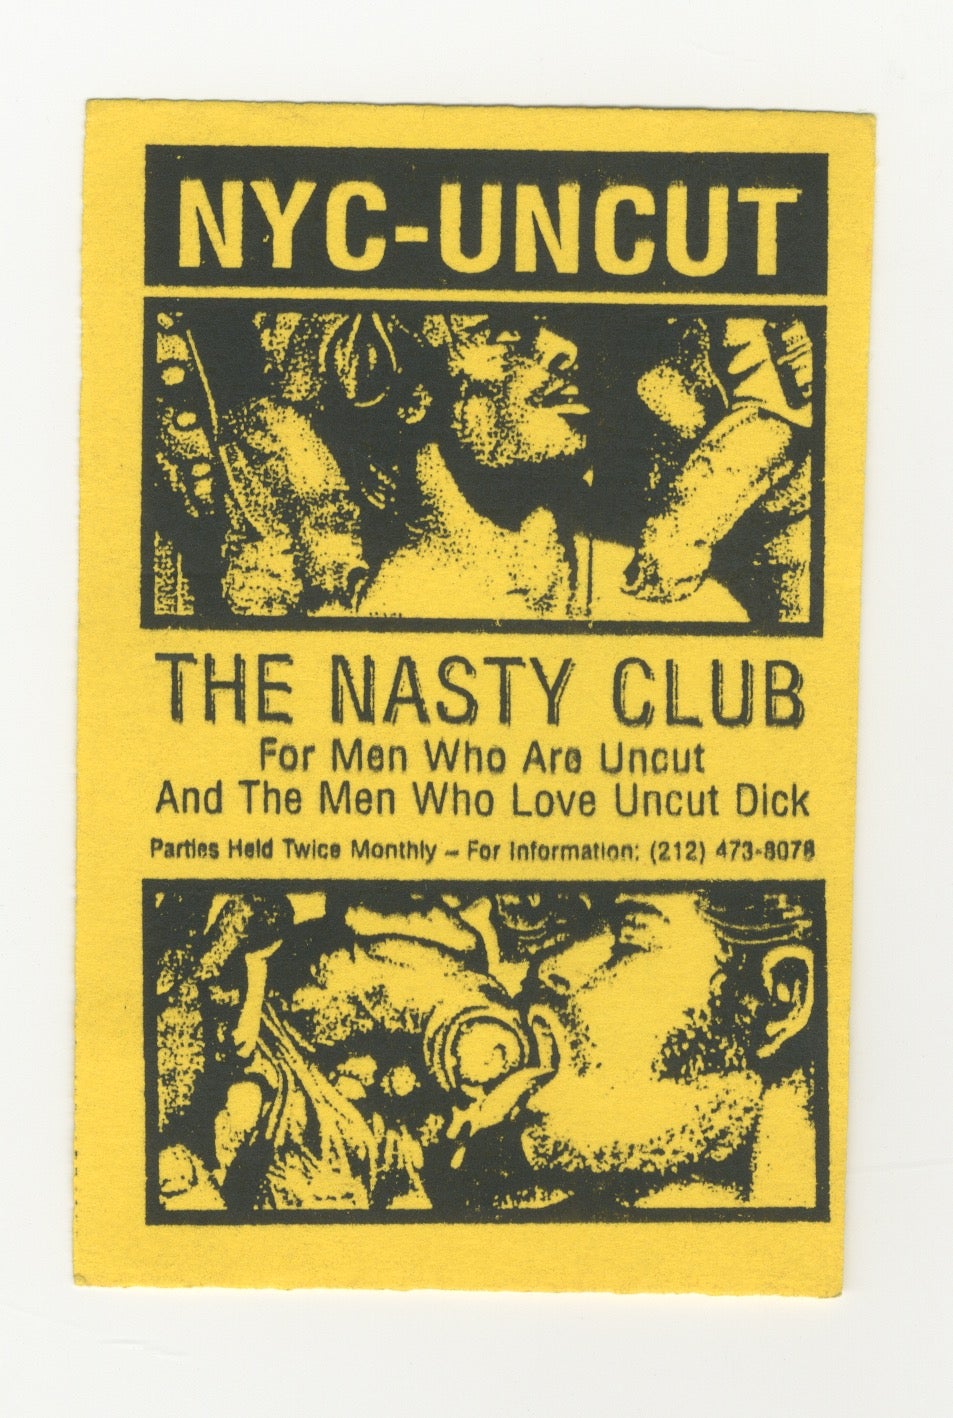 NYC - UNCUT: The Nasty Club party advertisement